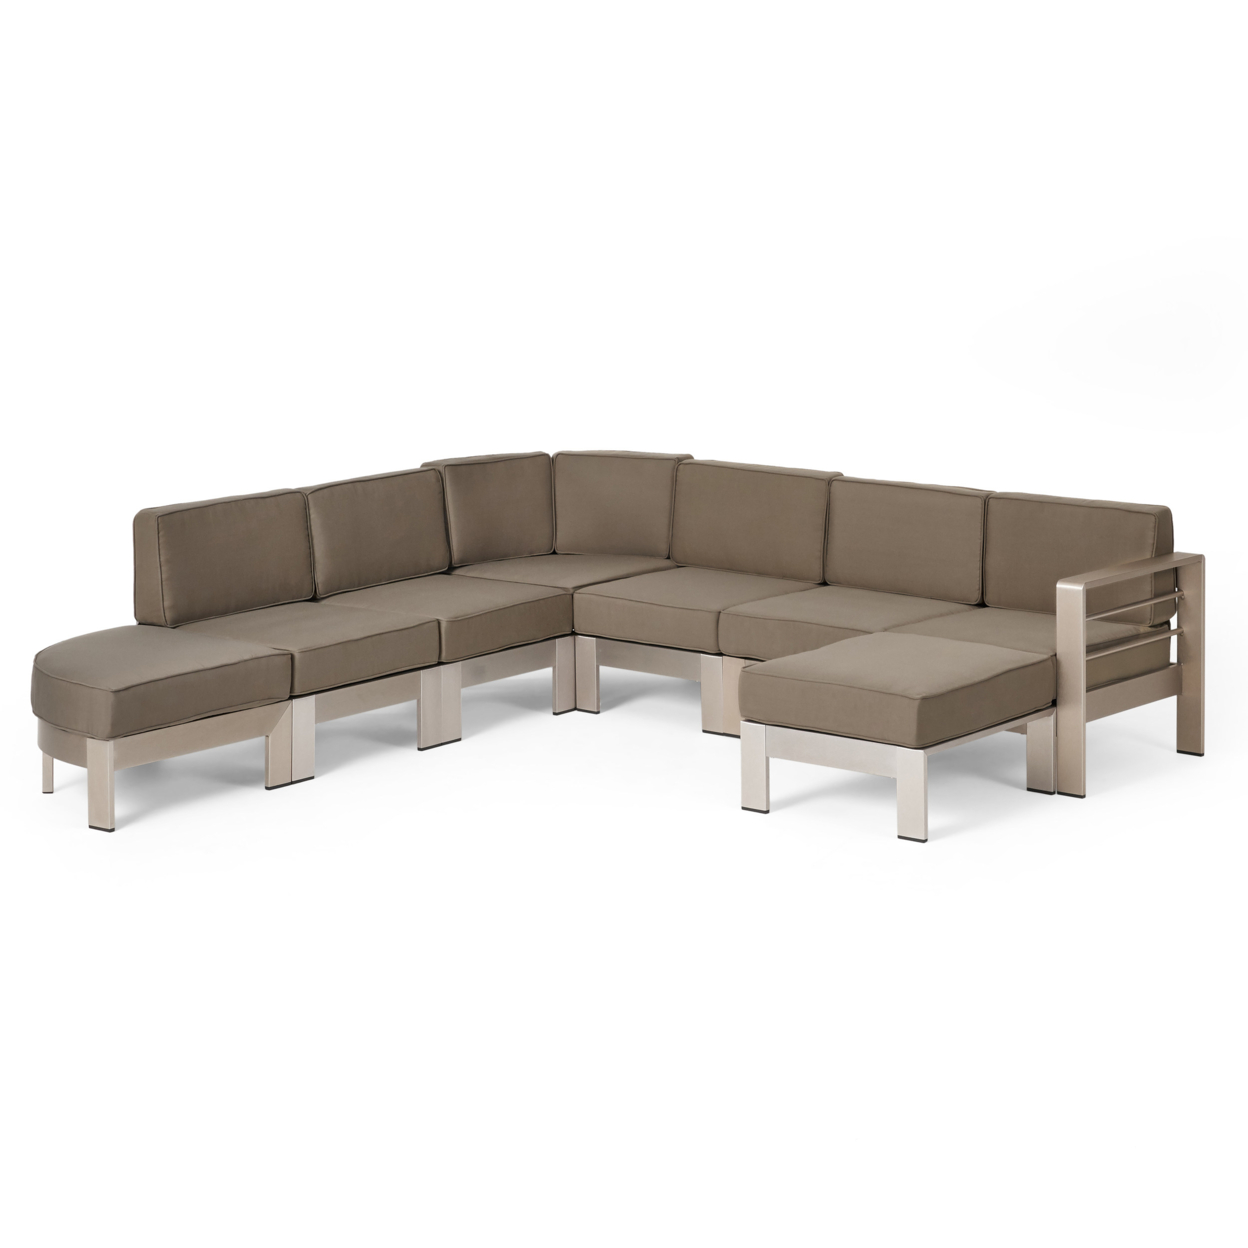 Cherie Half Round 5 Seater Sectional Set With Ottoman